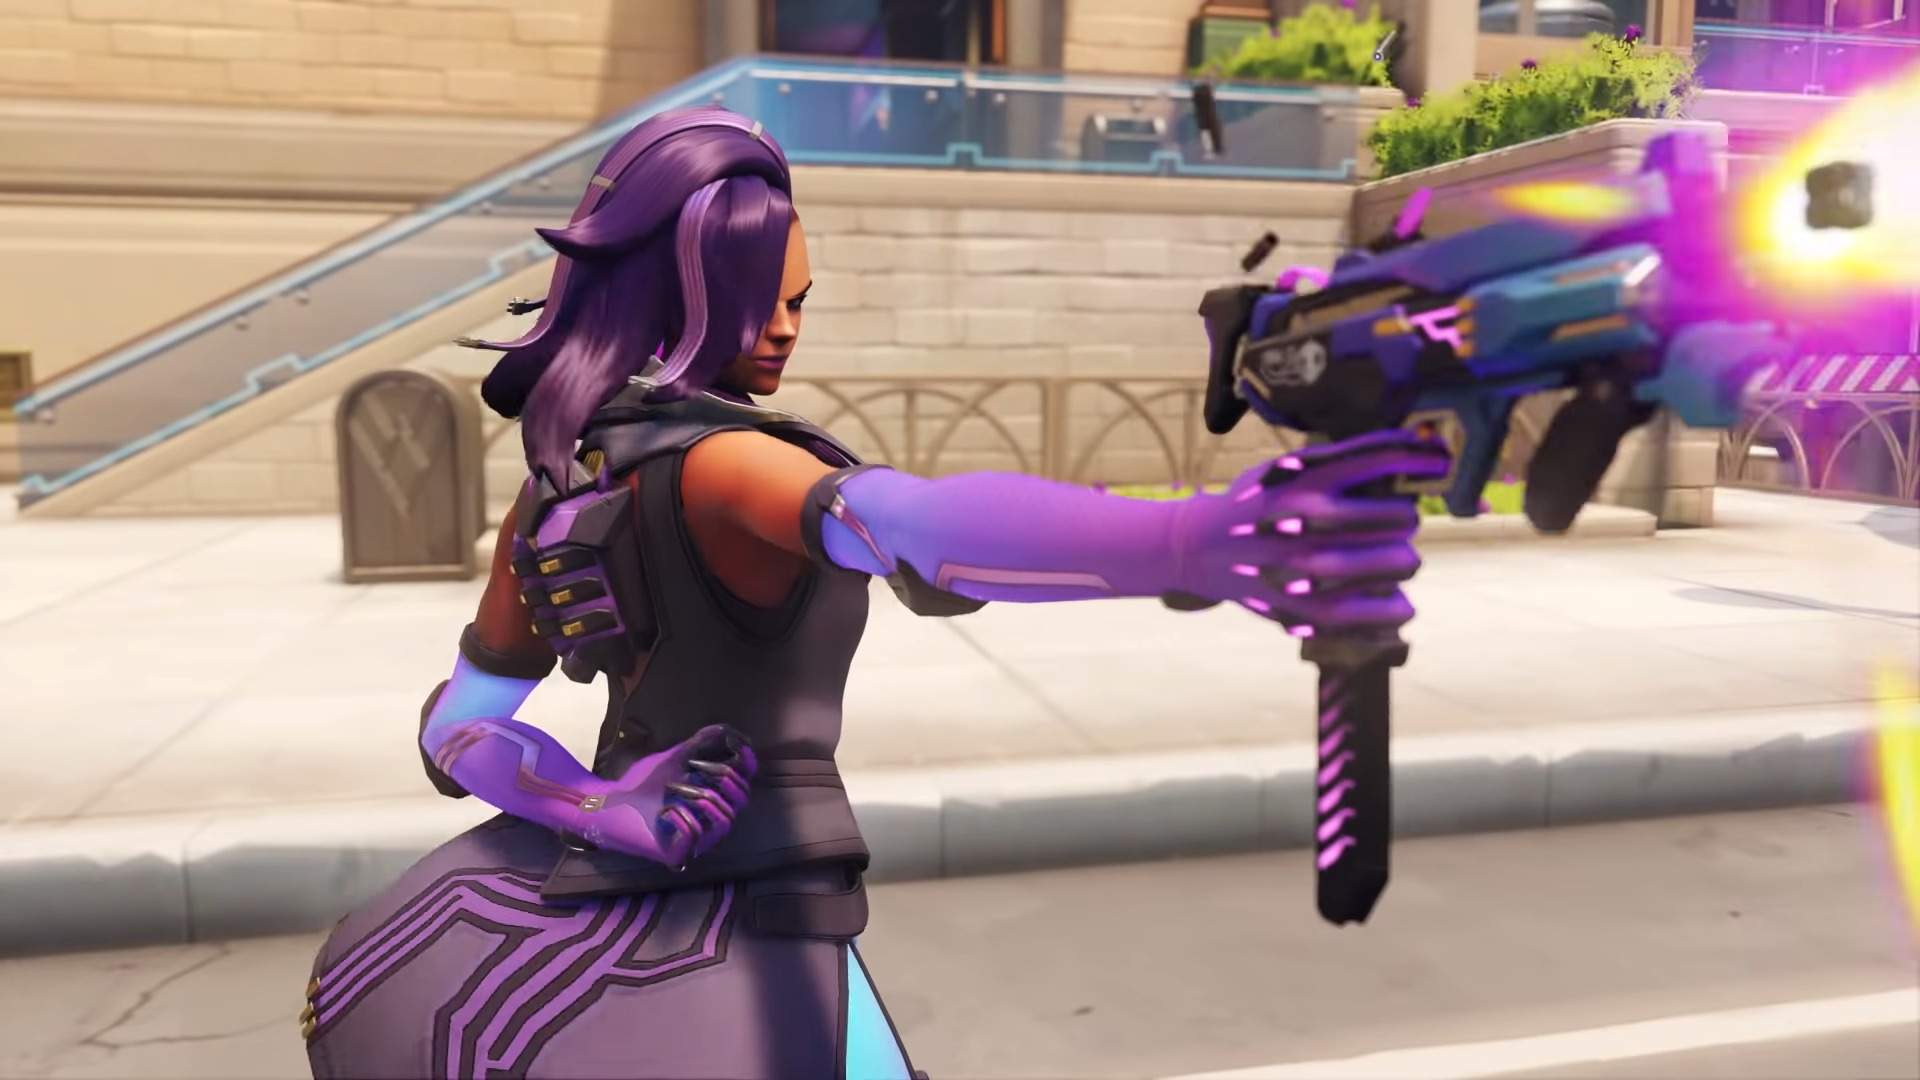 1920x1080 Overwatch 2 Sombra guide: how to use her reworked abilities | TechRadar